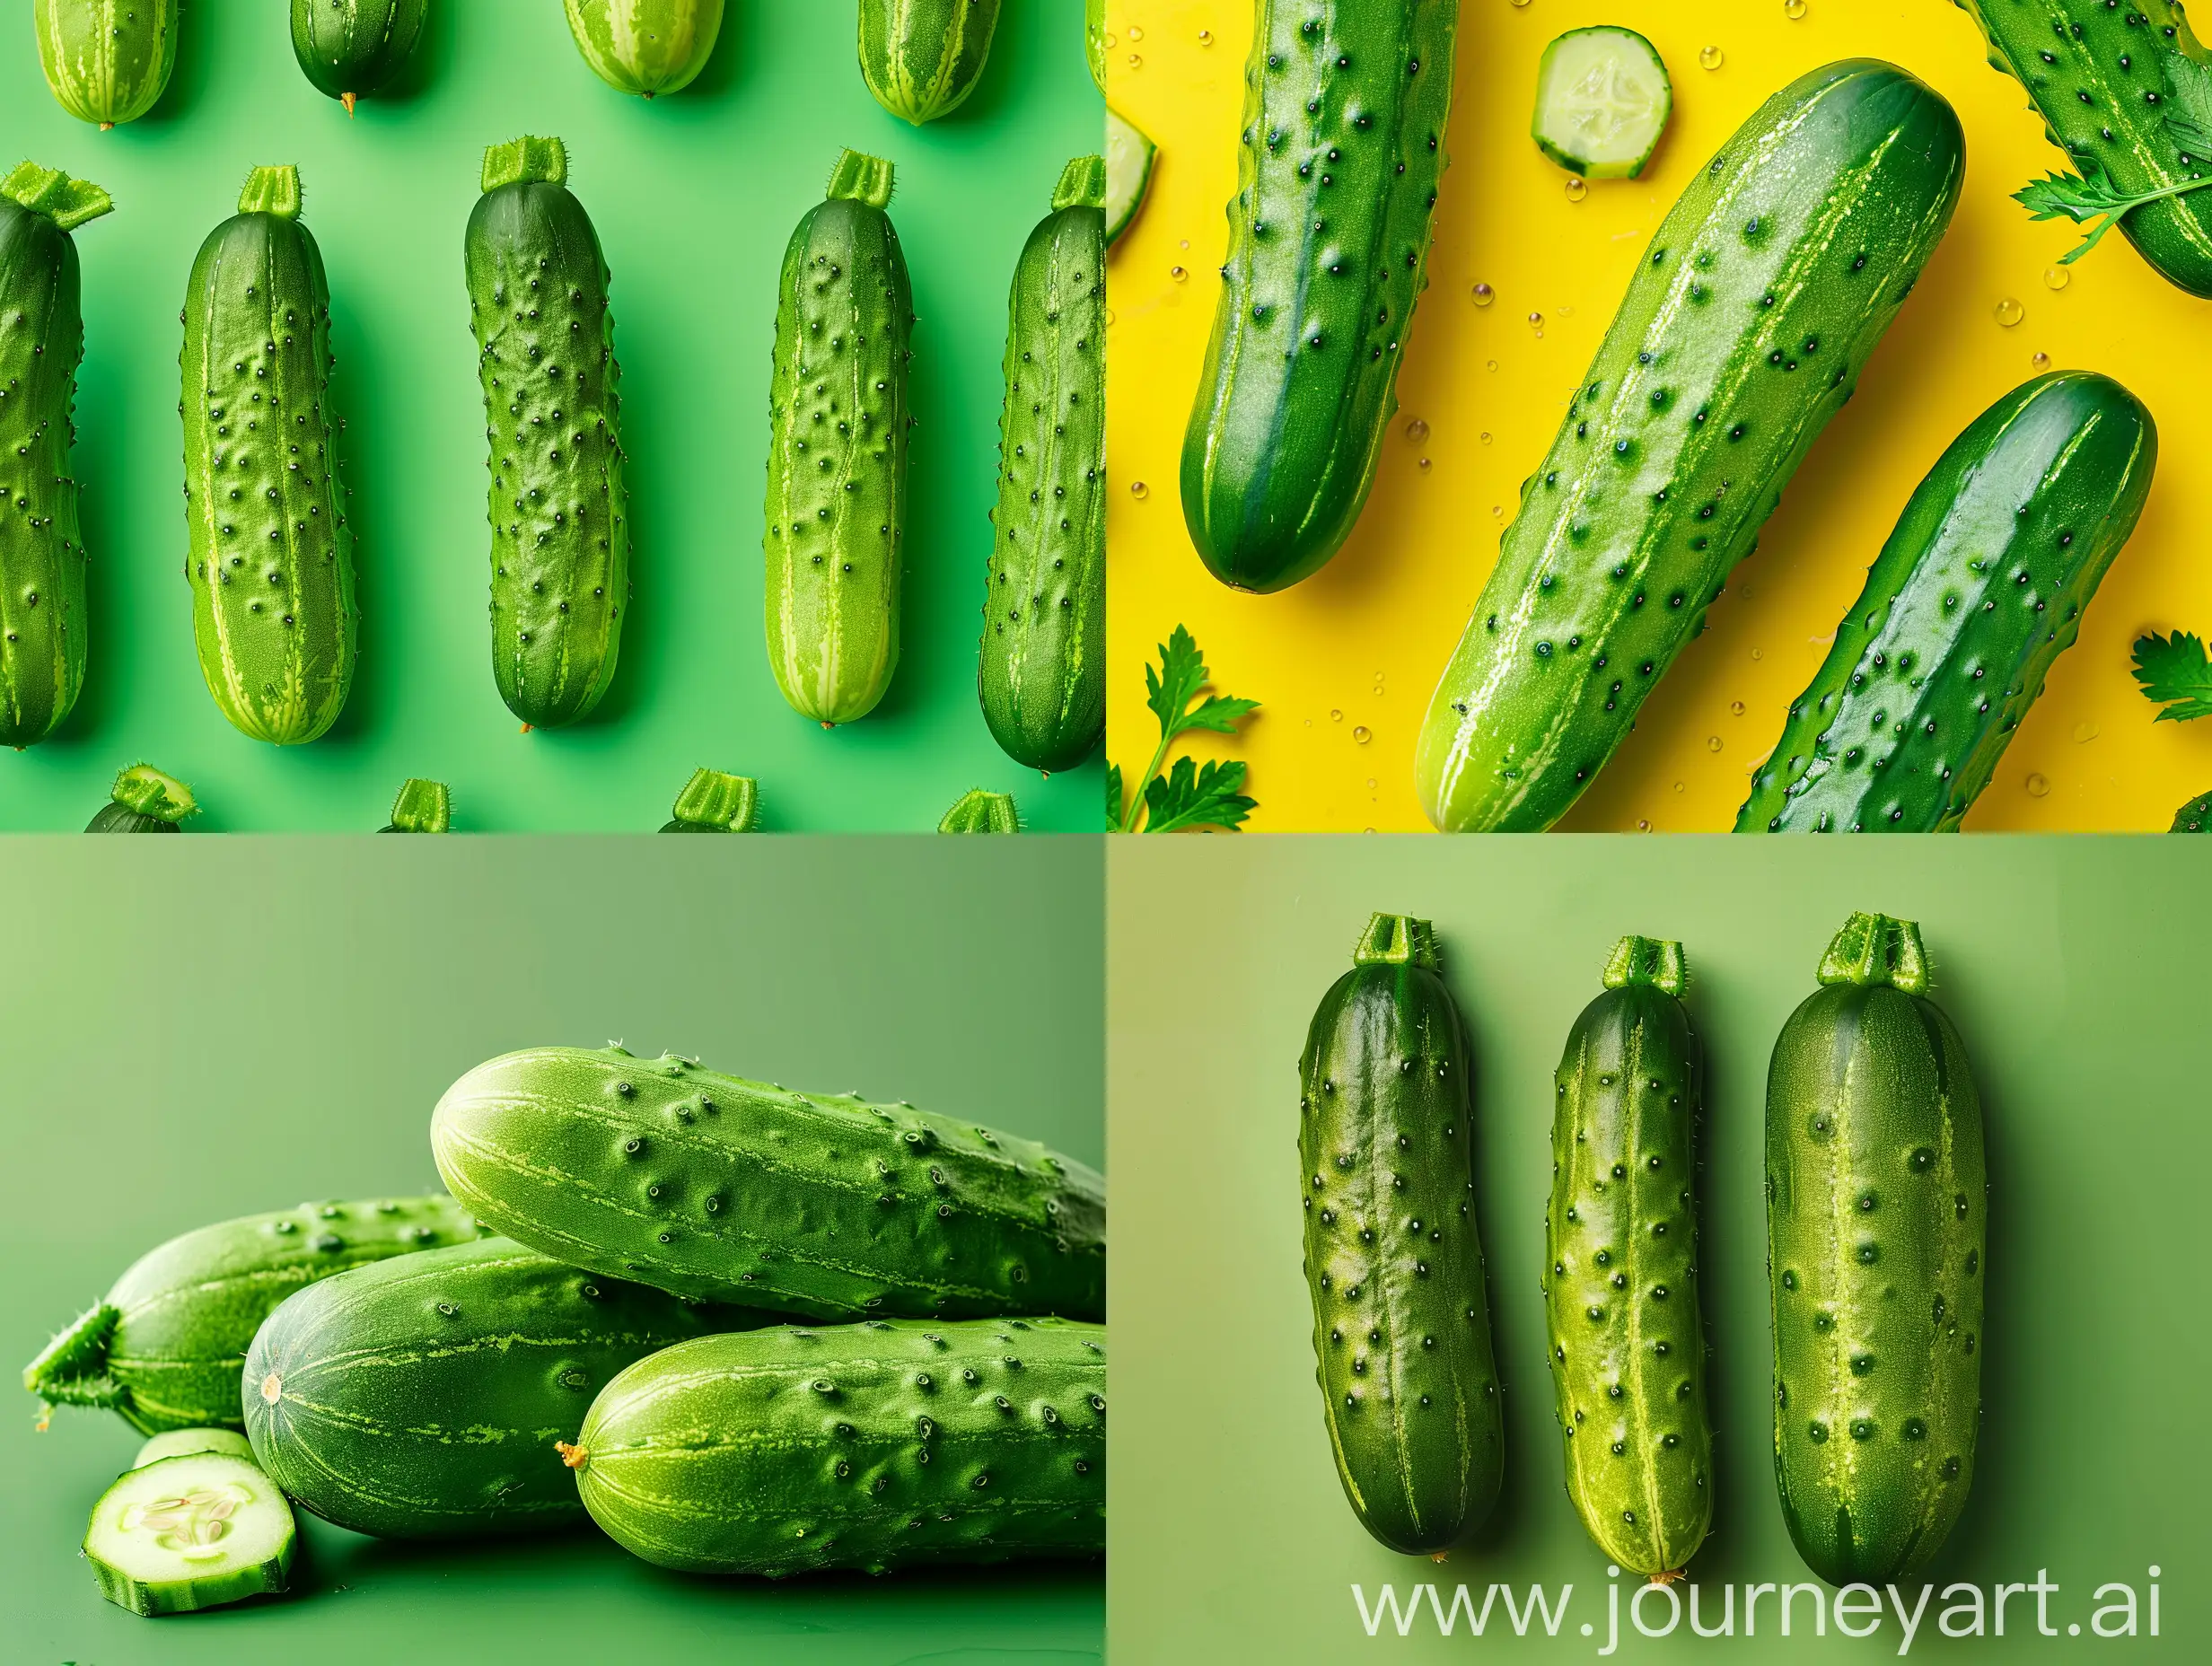 Vibrant-Studio-Photography-with-Cucumber-Green-Background